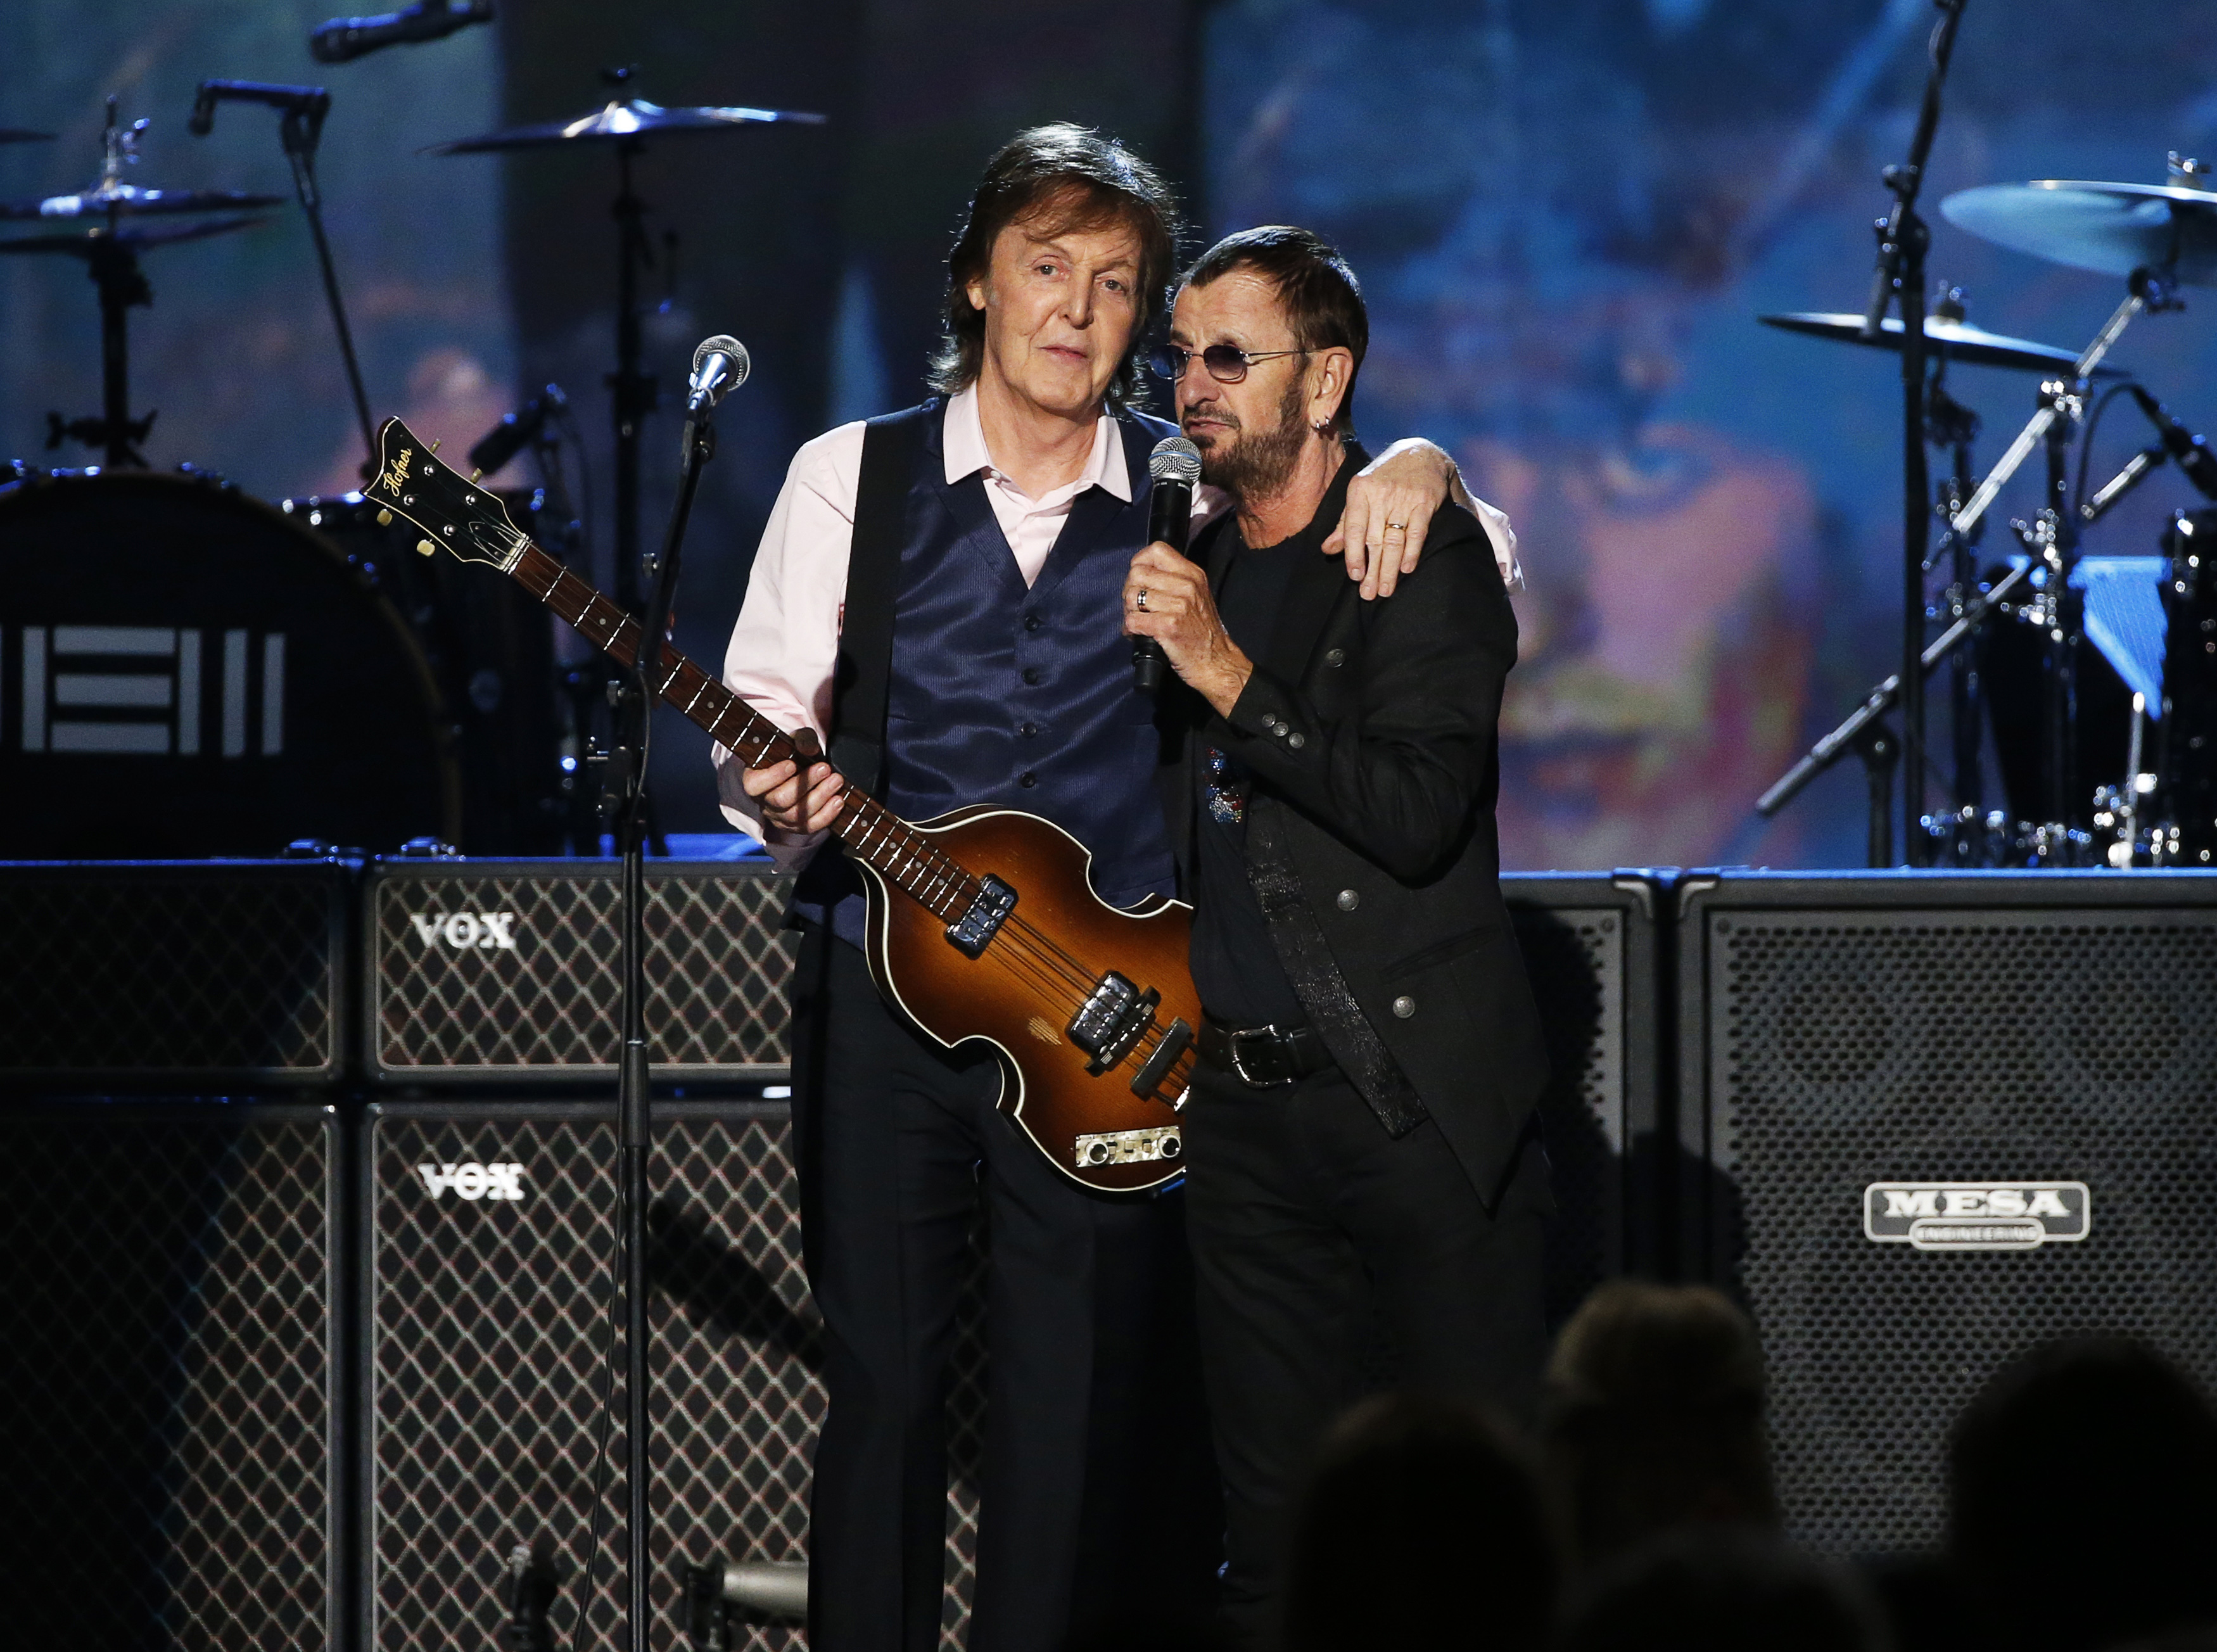 Paul McCartney (L) and Ringo Starr perform during the taping of "The Night That Changed America: A GRAMMY Salute To The Beatles", which commemorates the 50th anniversary of The Beatles appearance on the Ed Sullivan Show, in Los Angeles January 27, 2014.   REUTERS/Mario Anzuoni (UNITED STATES - Tags: ENTERTAINMENT) - GM1EA1S16VV01